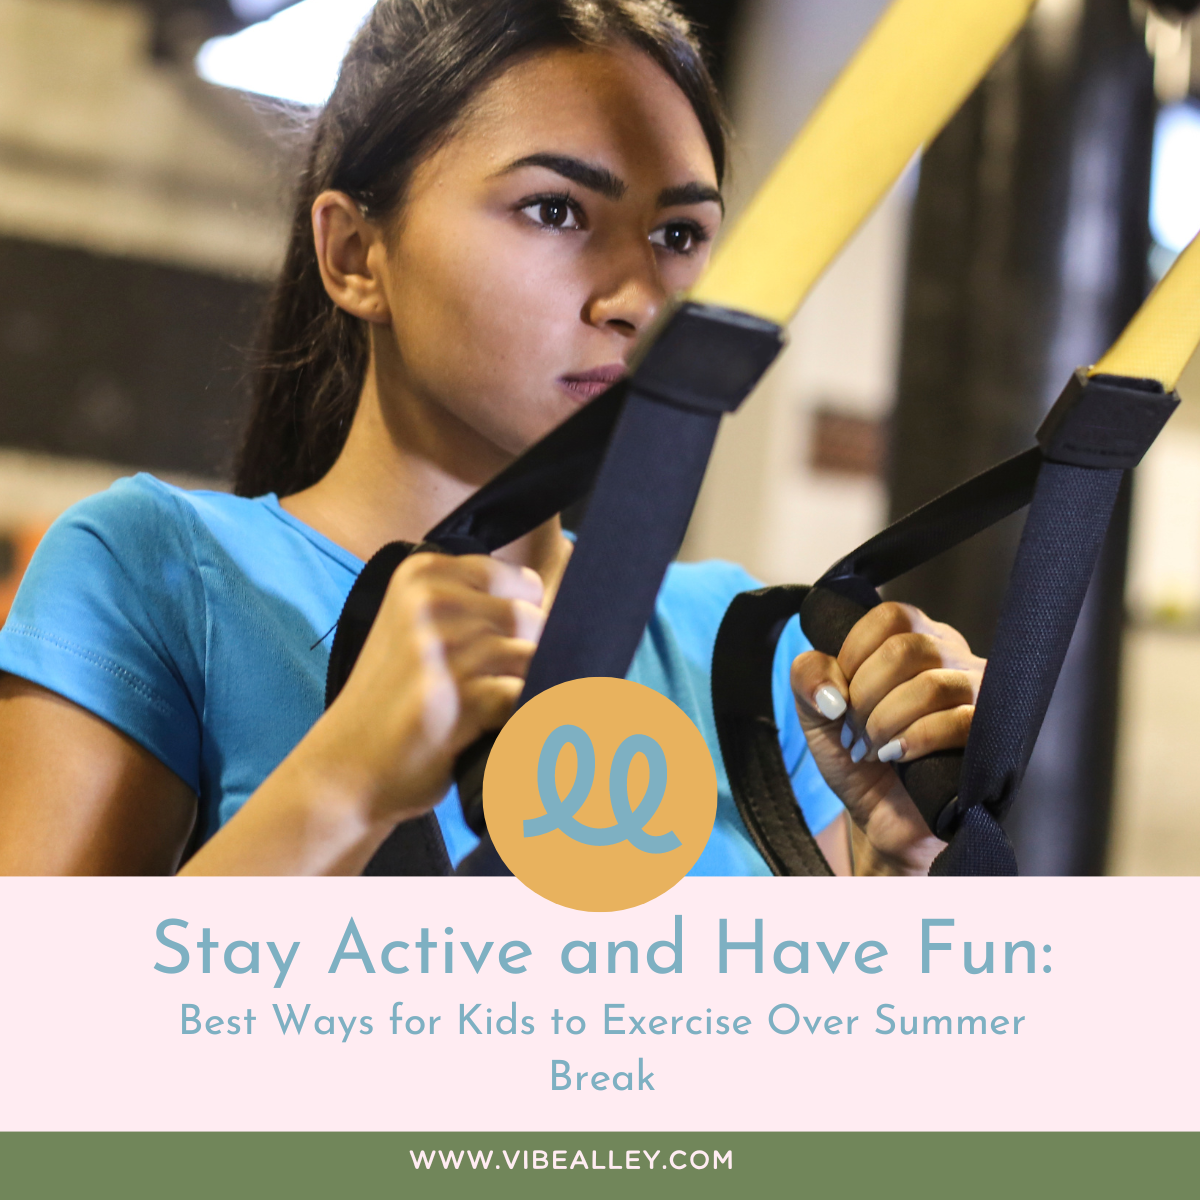 Stay Active and Have Fun: Best Ways for Kids to Exercise Over Summer Break